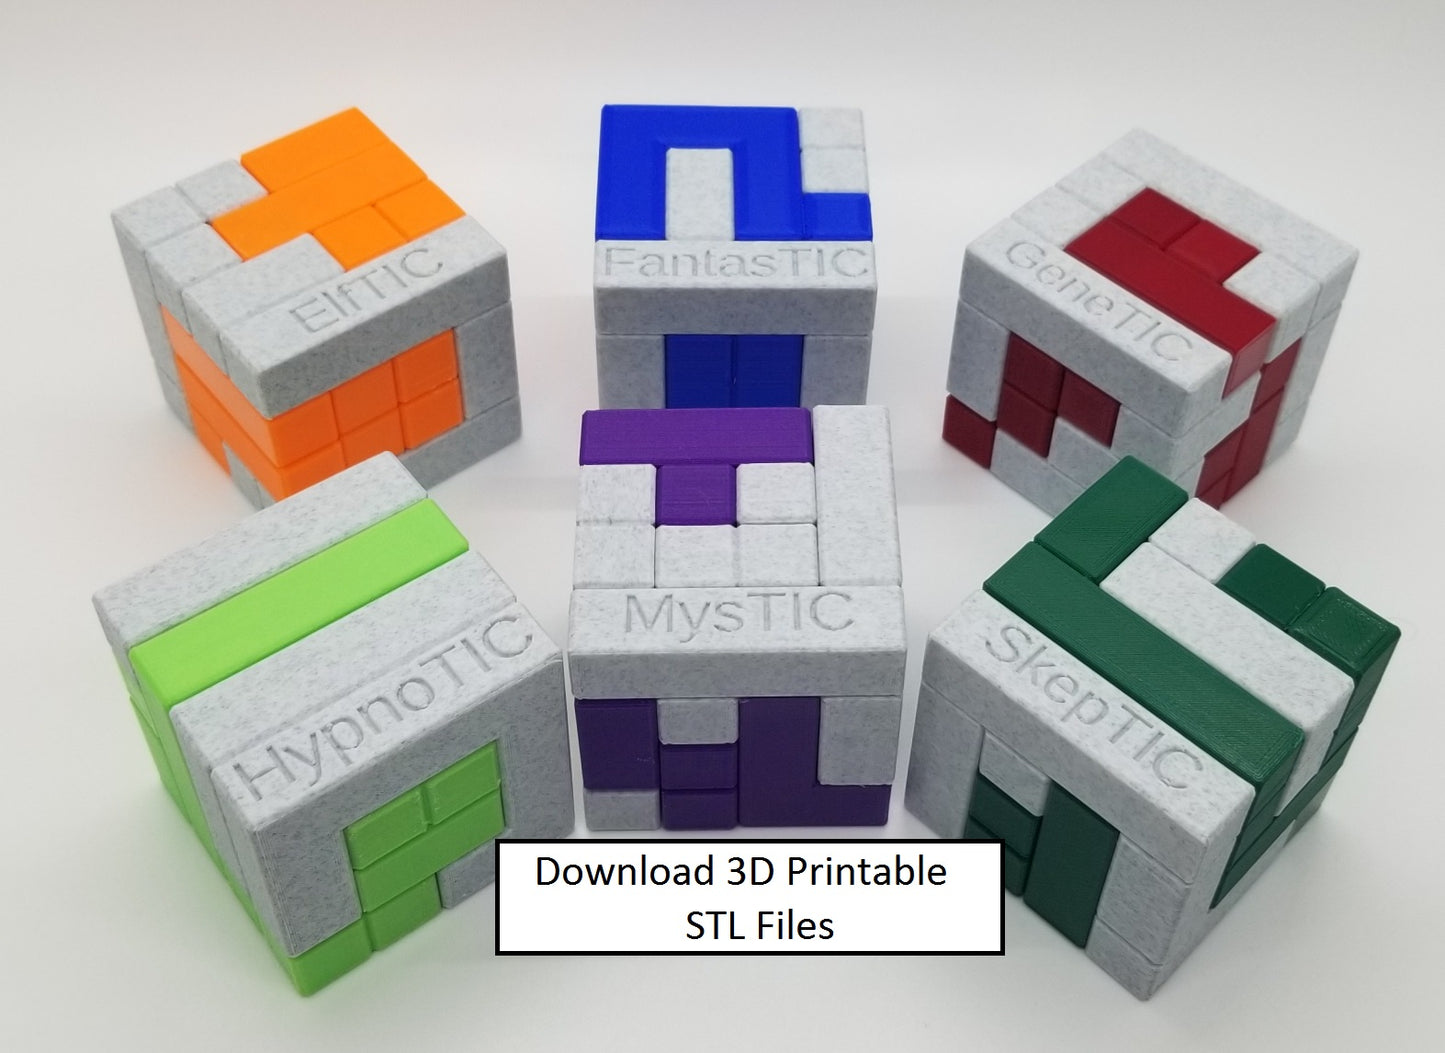 Download 3D Printable STL Files for the 6 Favorite Turning Interlocking Cube Puzzles